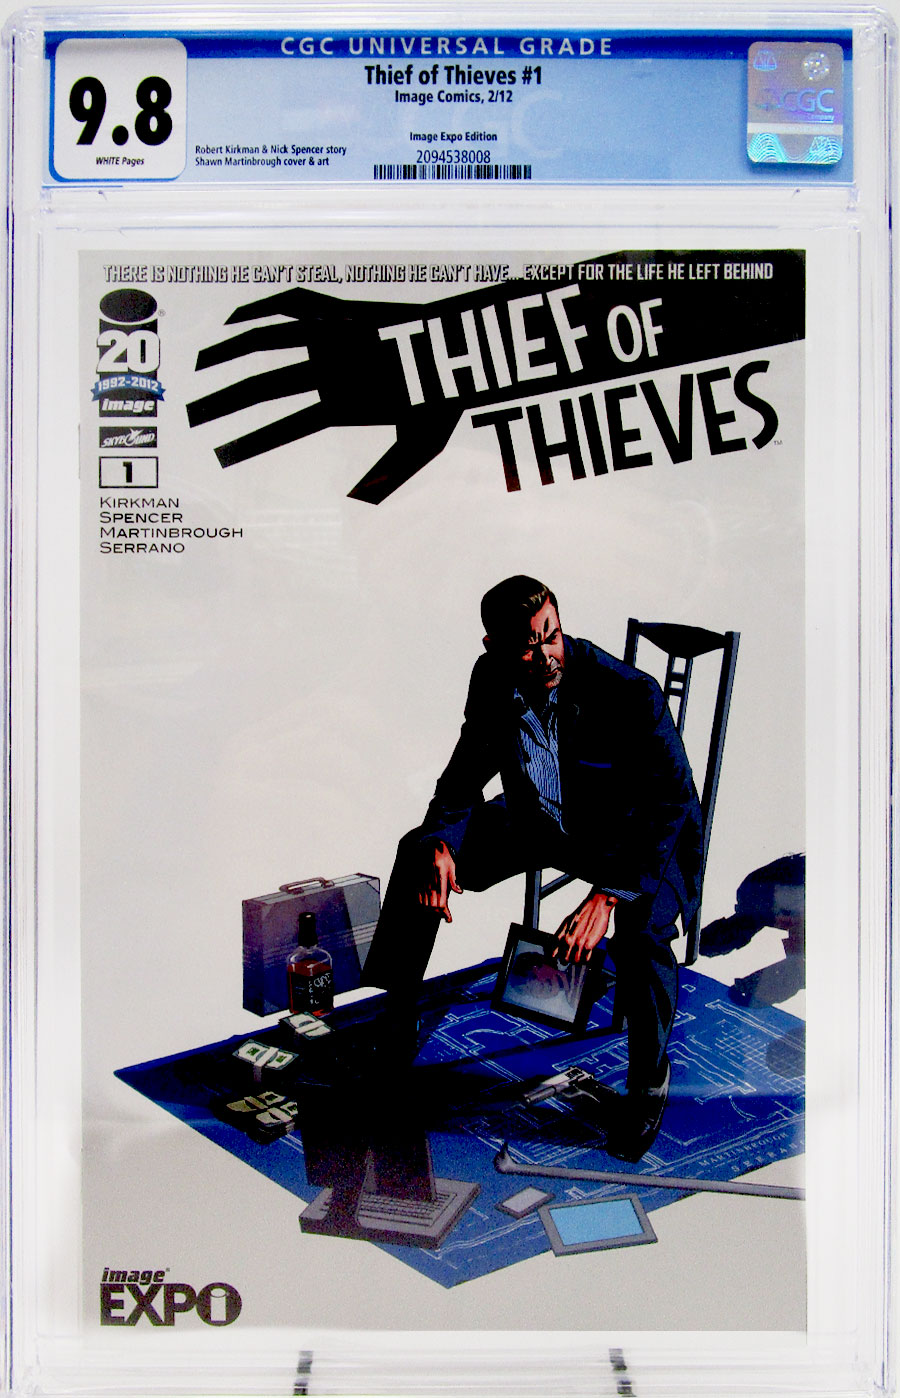 Thief Of Thieves #1 Cover G Image Expo Variant CGC 9.8